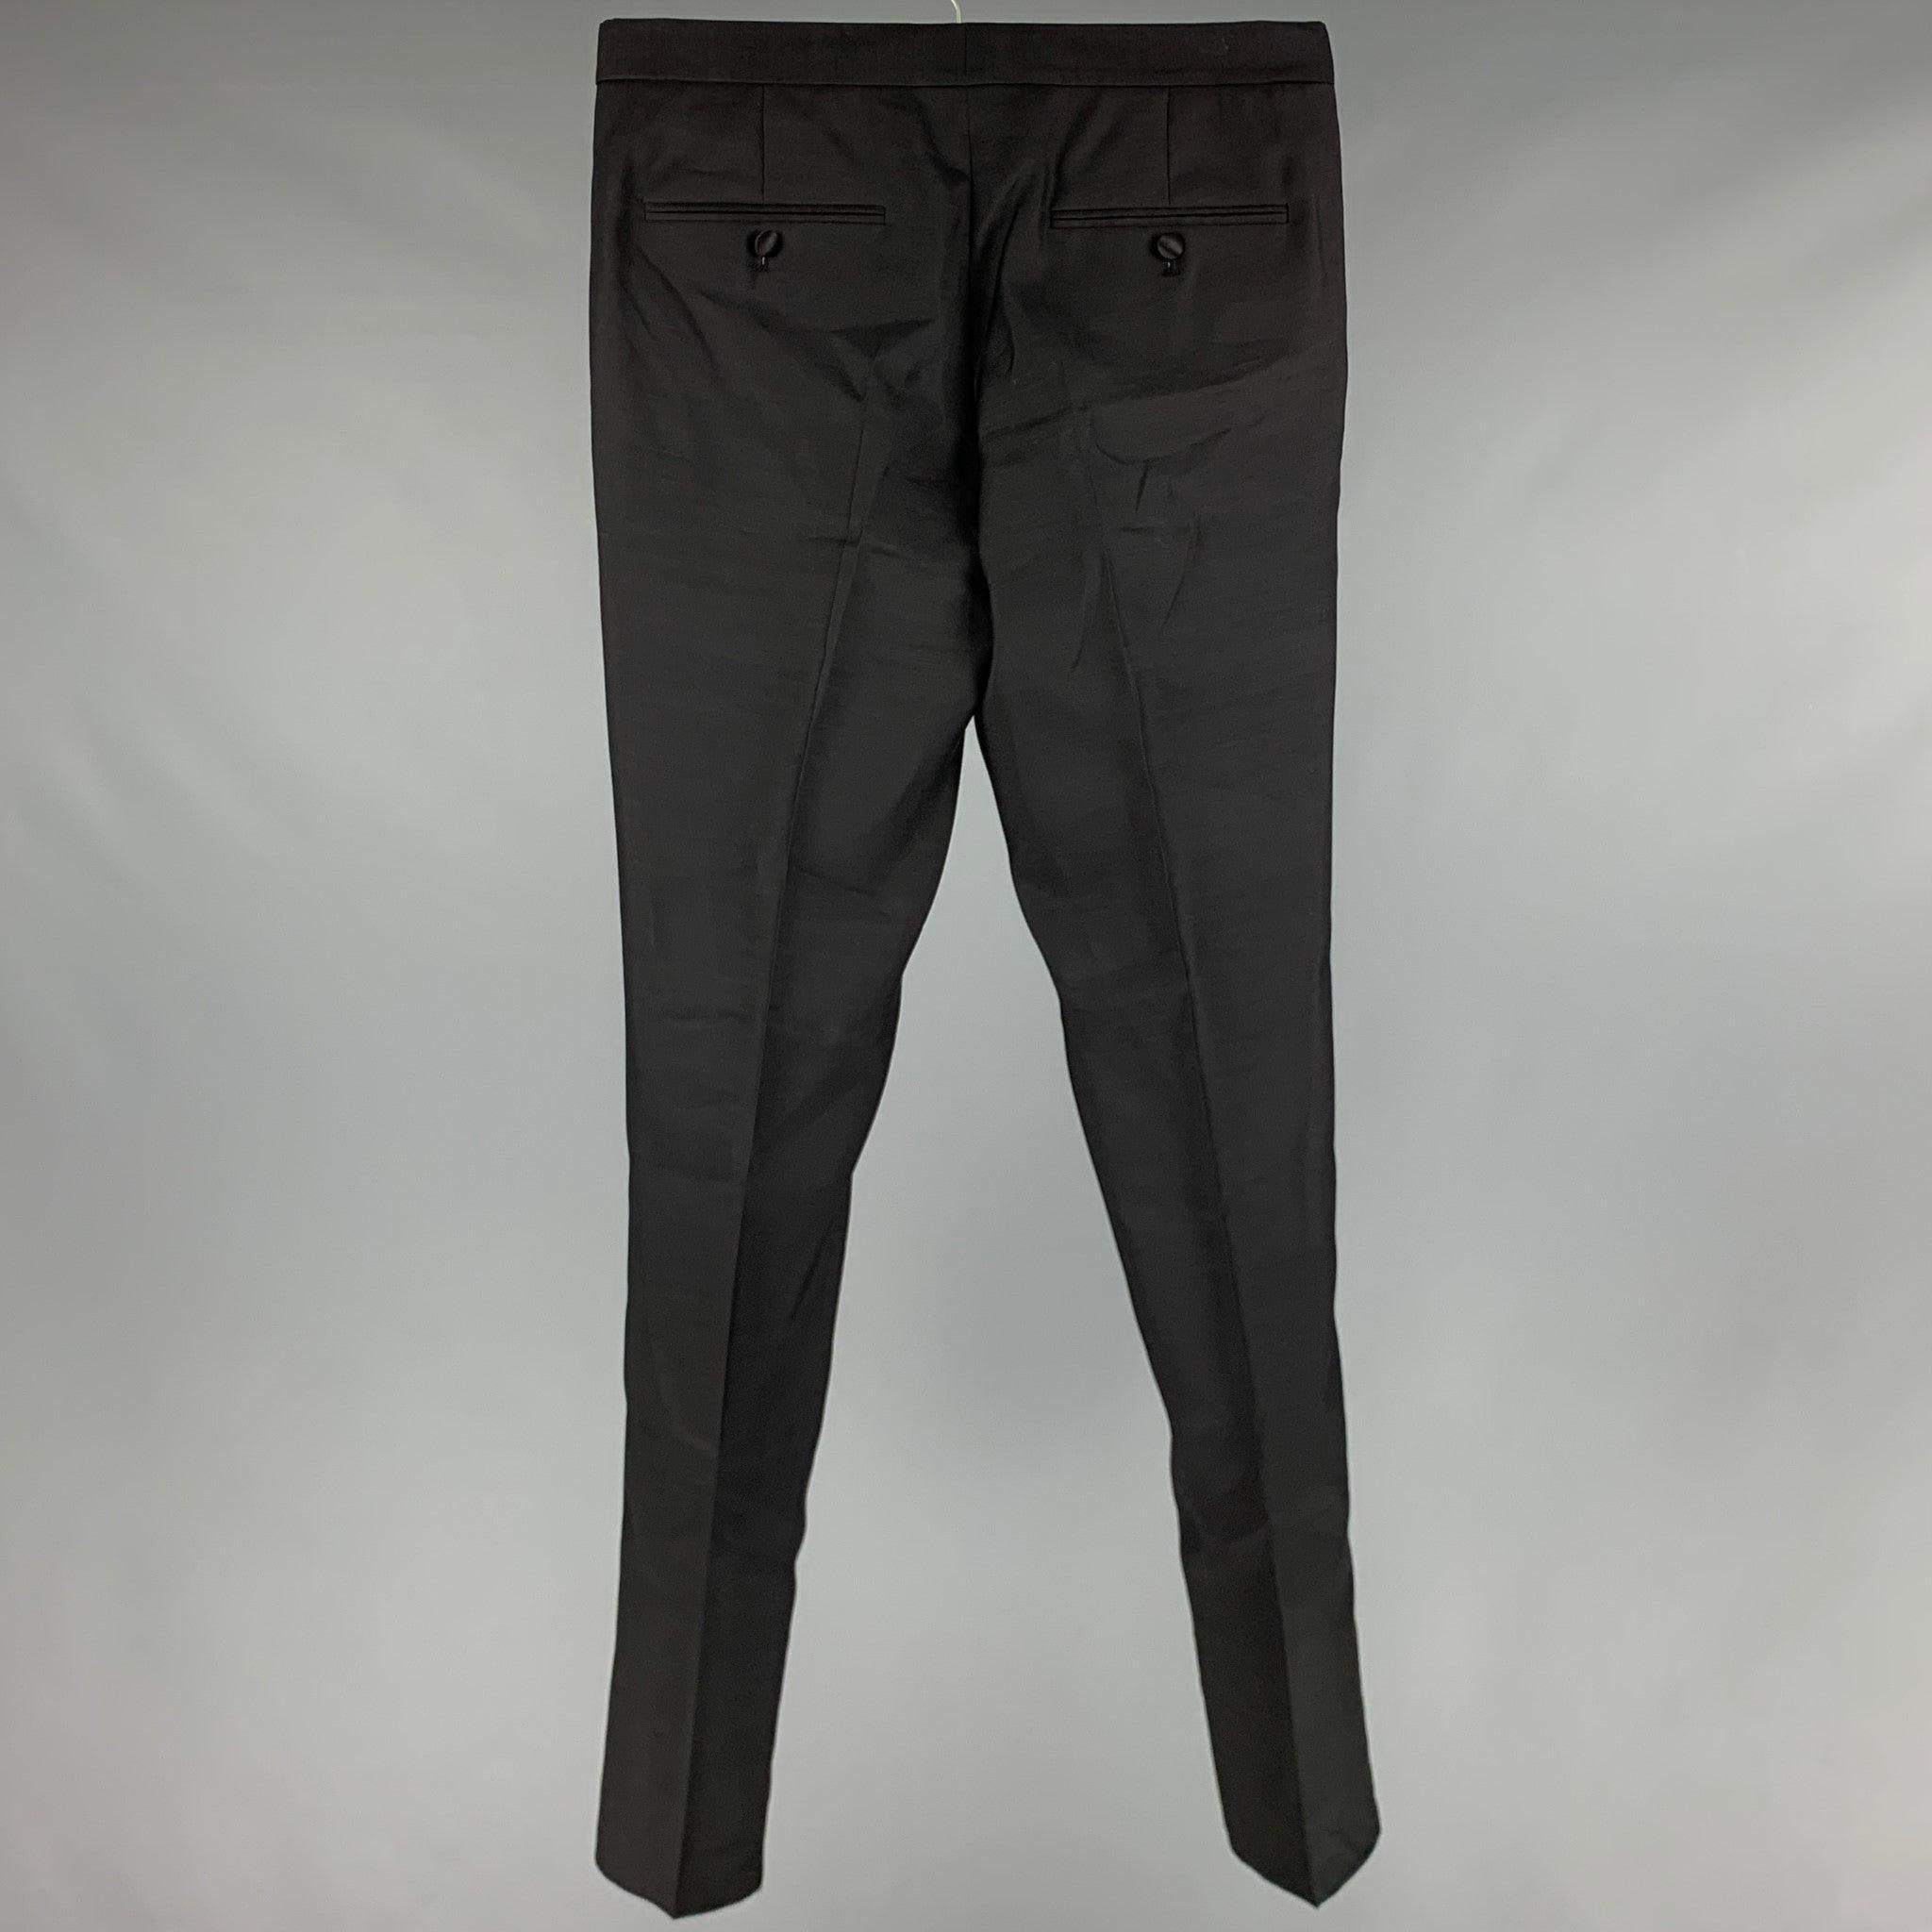 DSQUARED2 dress pants
in a
black wool blend fabric featuring side tabs, and a button fly closure. Made in Italy.New With Tags. 

Marked:   48 

Measurements: 
  Waist: 32 inches Rise: 9 inches Inseam: 34 inches Leg Opening: 12.5 inches 
  
  
